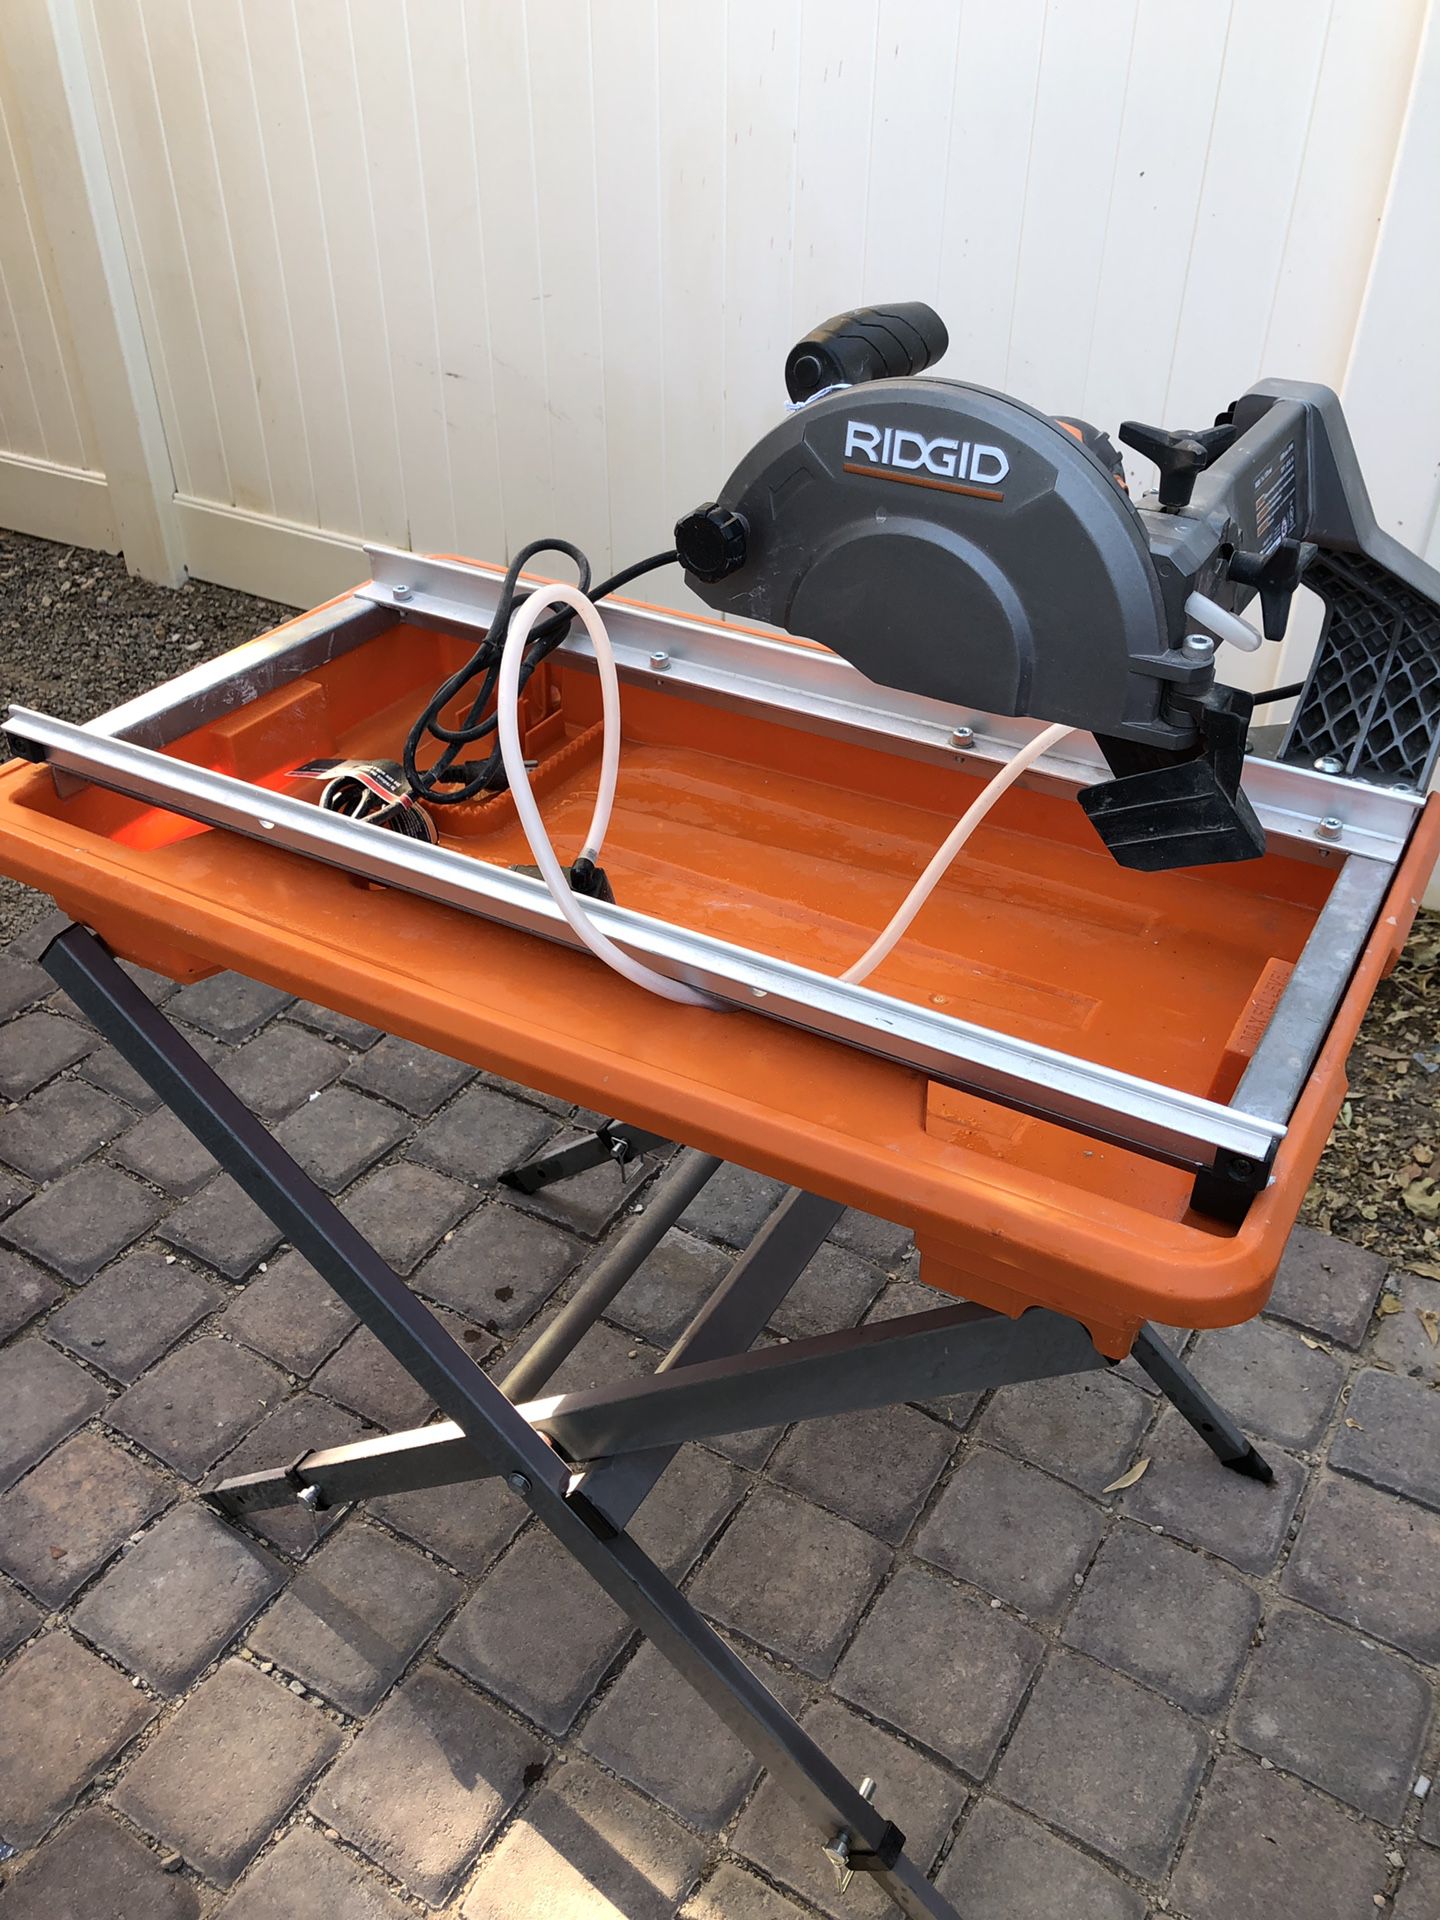 NEW RIDGID 7 in tile cutter table saw Please full read